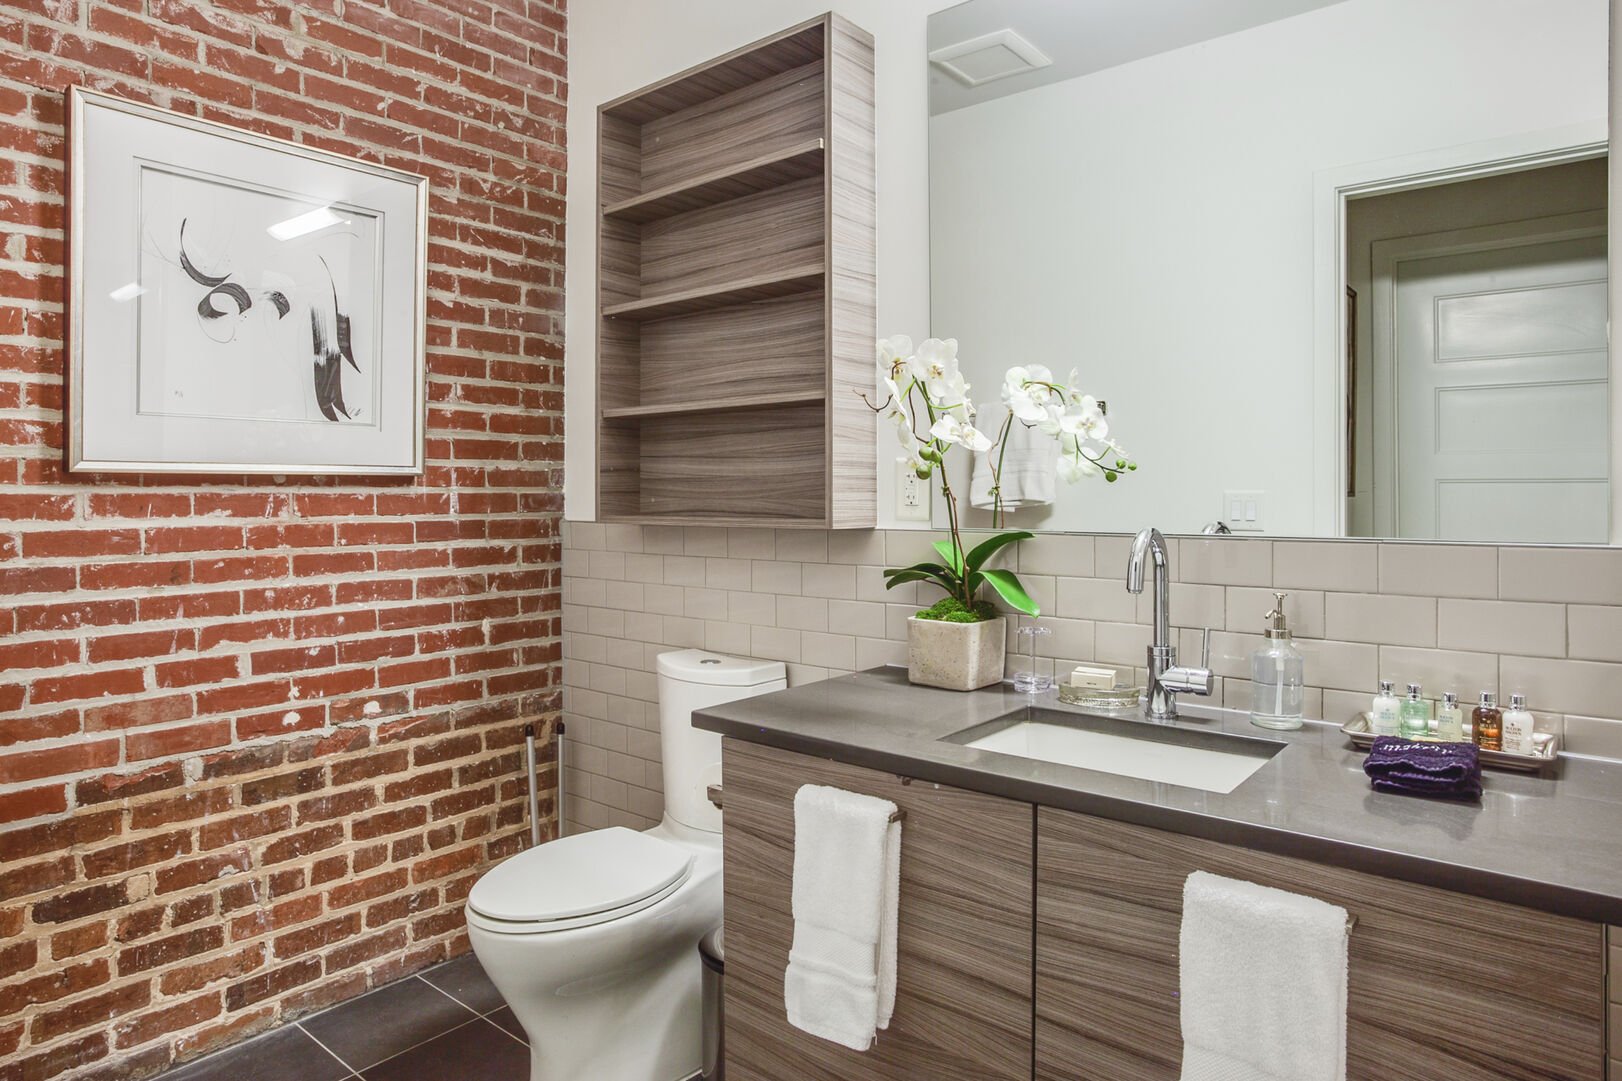 Bathroom with Brick Wall in our Ponce City Market Apartment